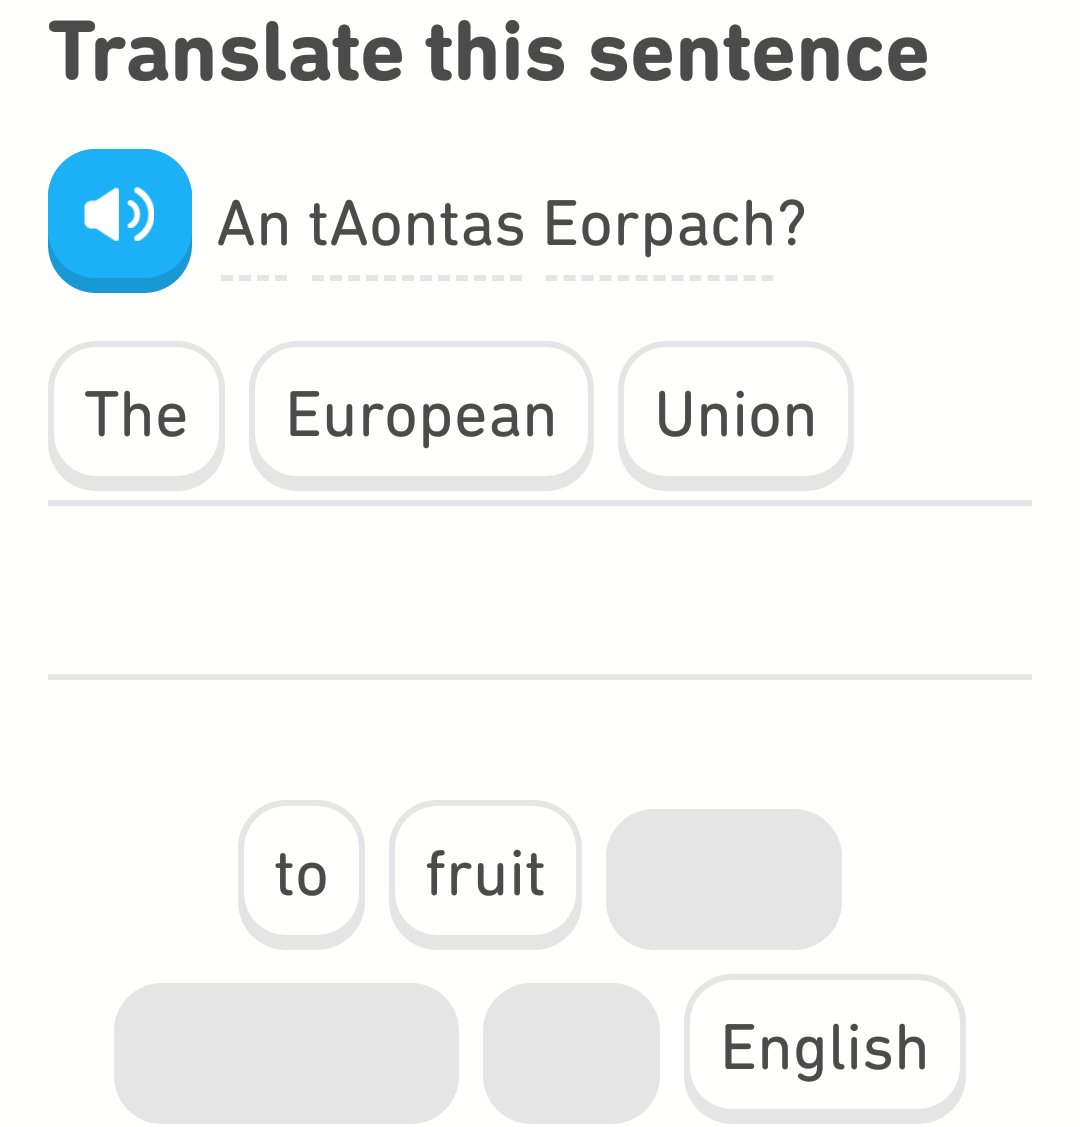 There are some people in my mentions who would definitely think "The European Union to fruit English" is a foreign plot.  #DuoLingo